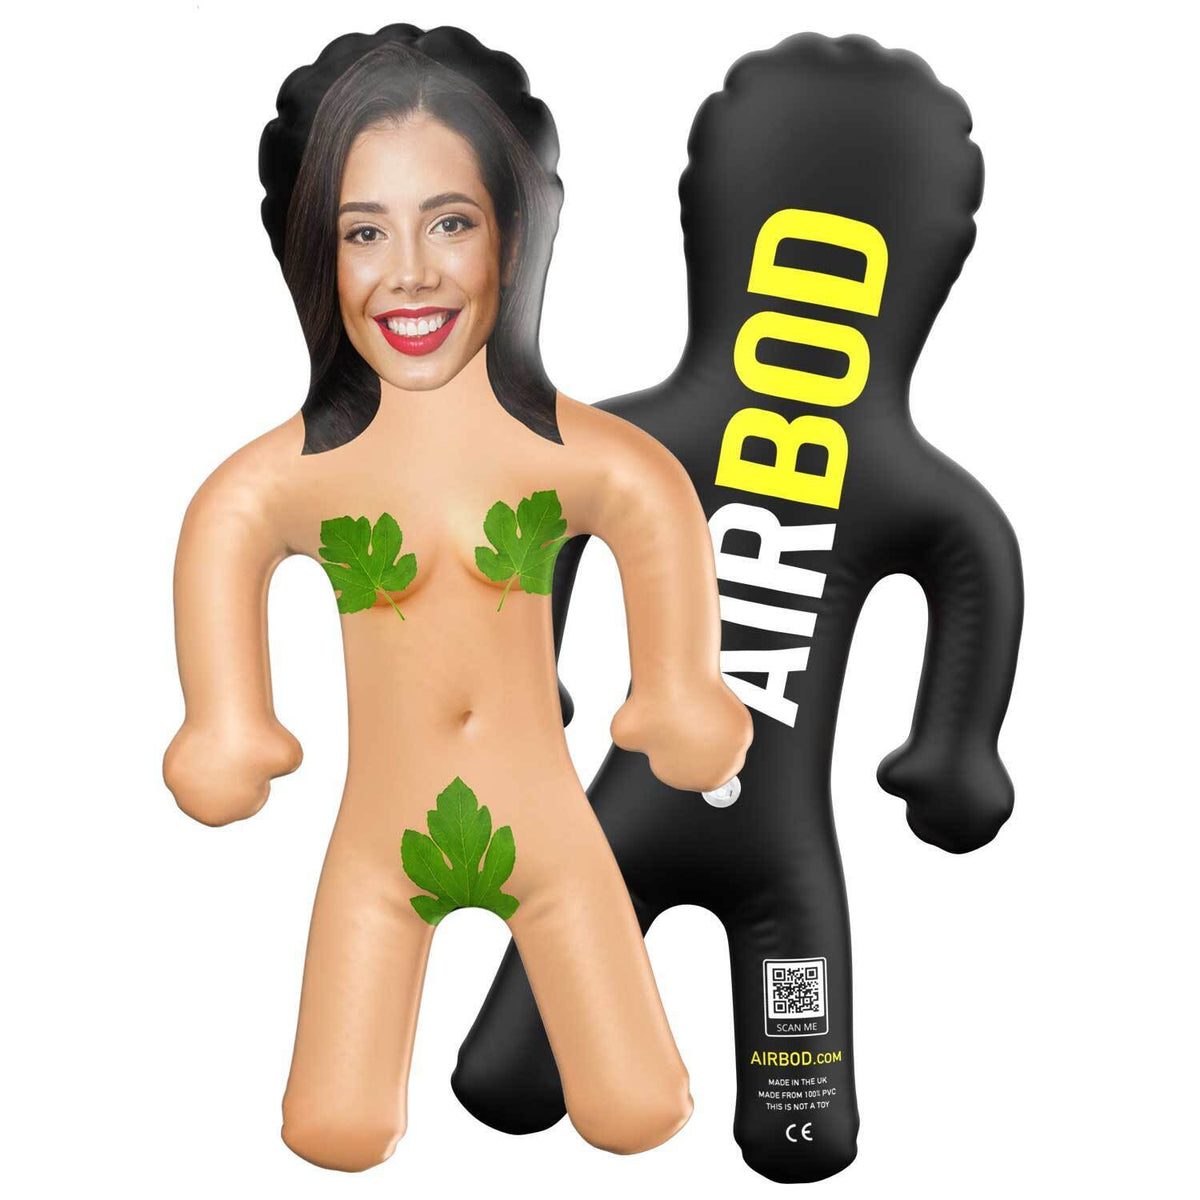 The Female Naturist Blow up Doll